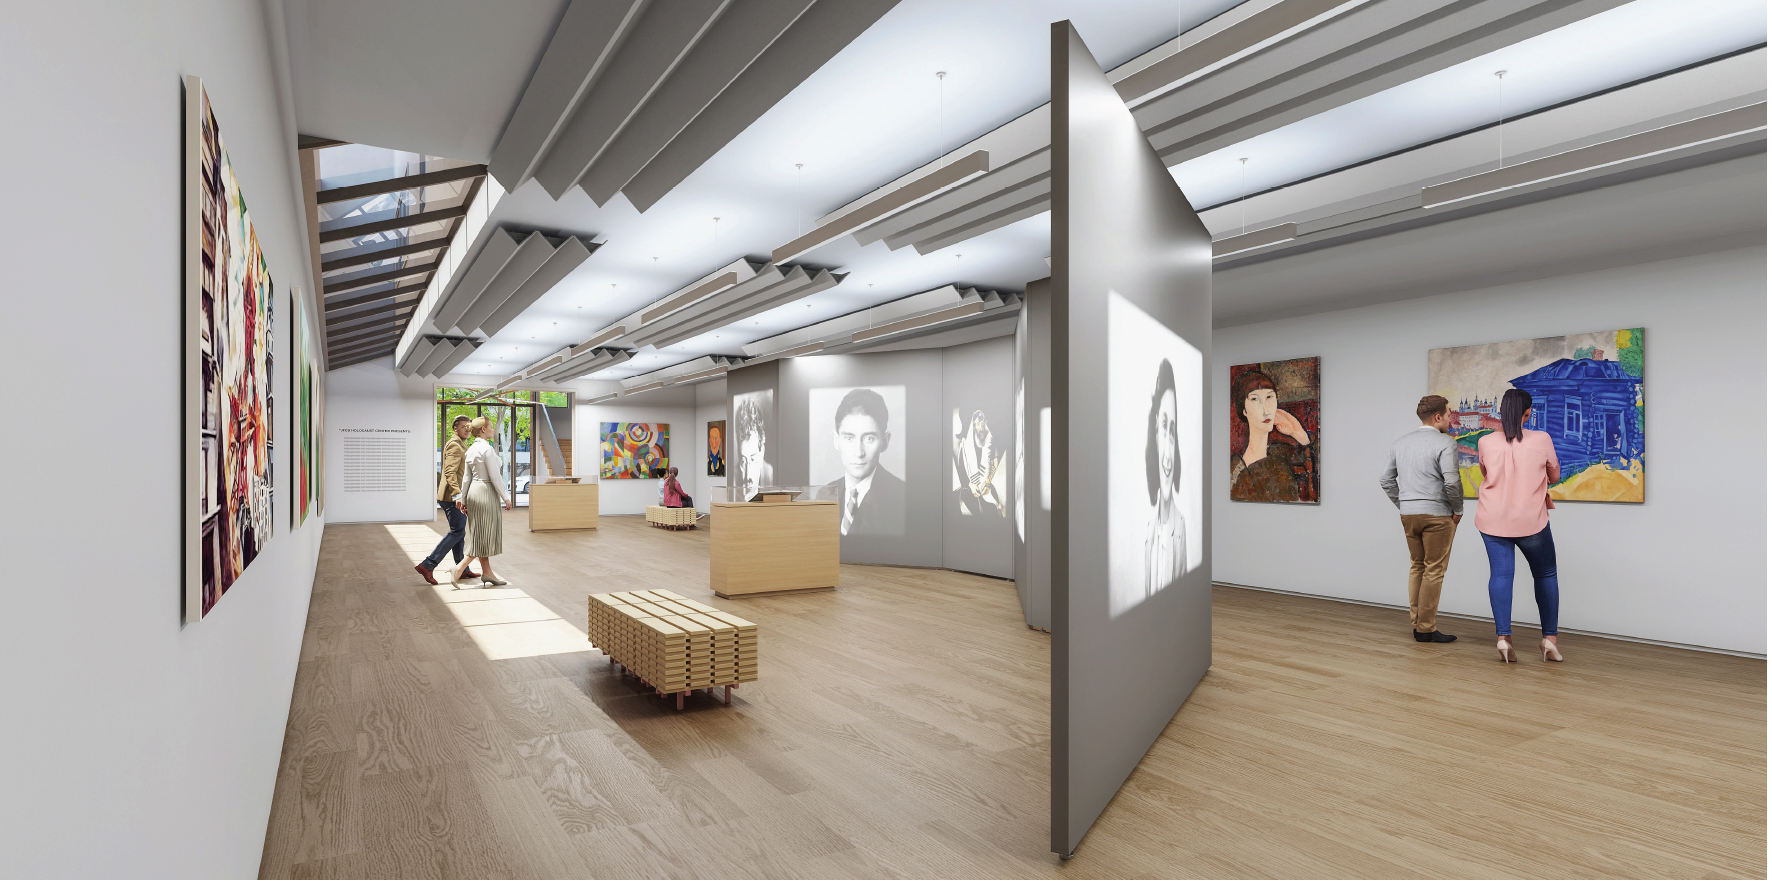 Artist’s rendering of the new JFCS Holocaust Center exhibit space